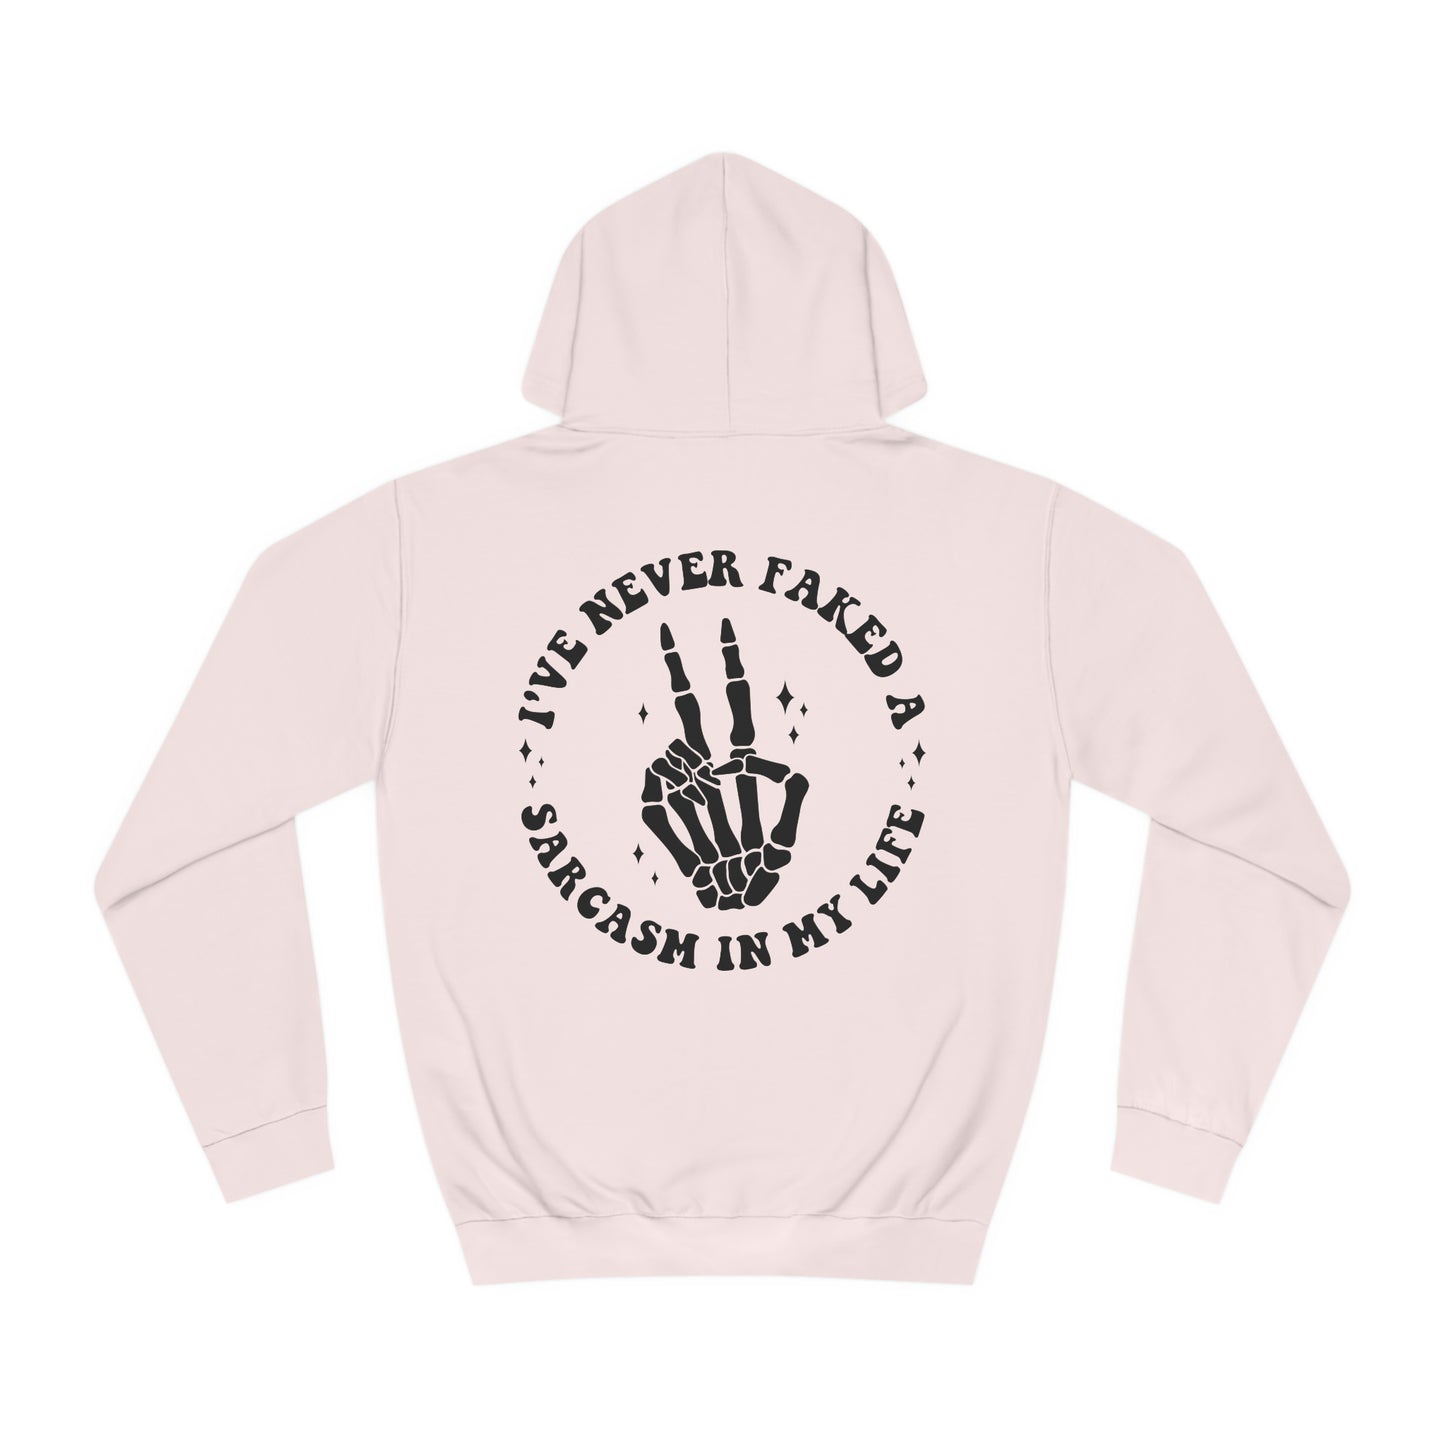 "I Never Faked A Sarcasm In My Life" Unisex College Hoodie